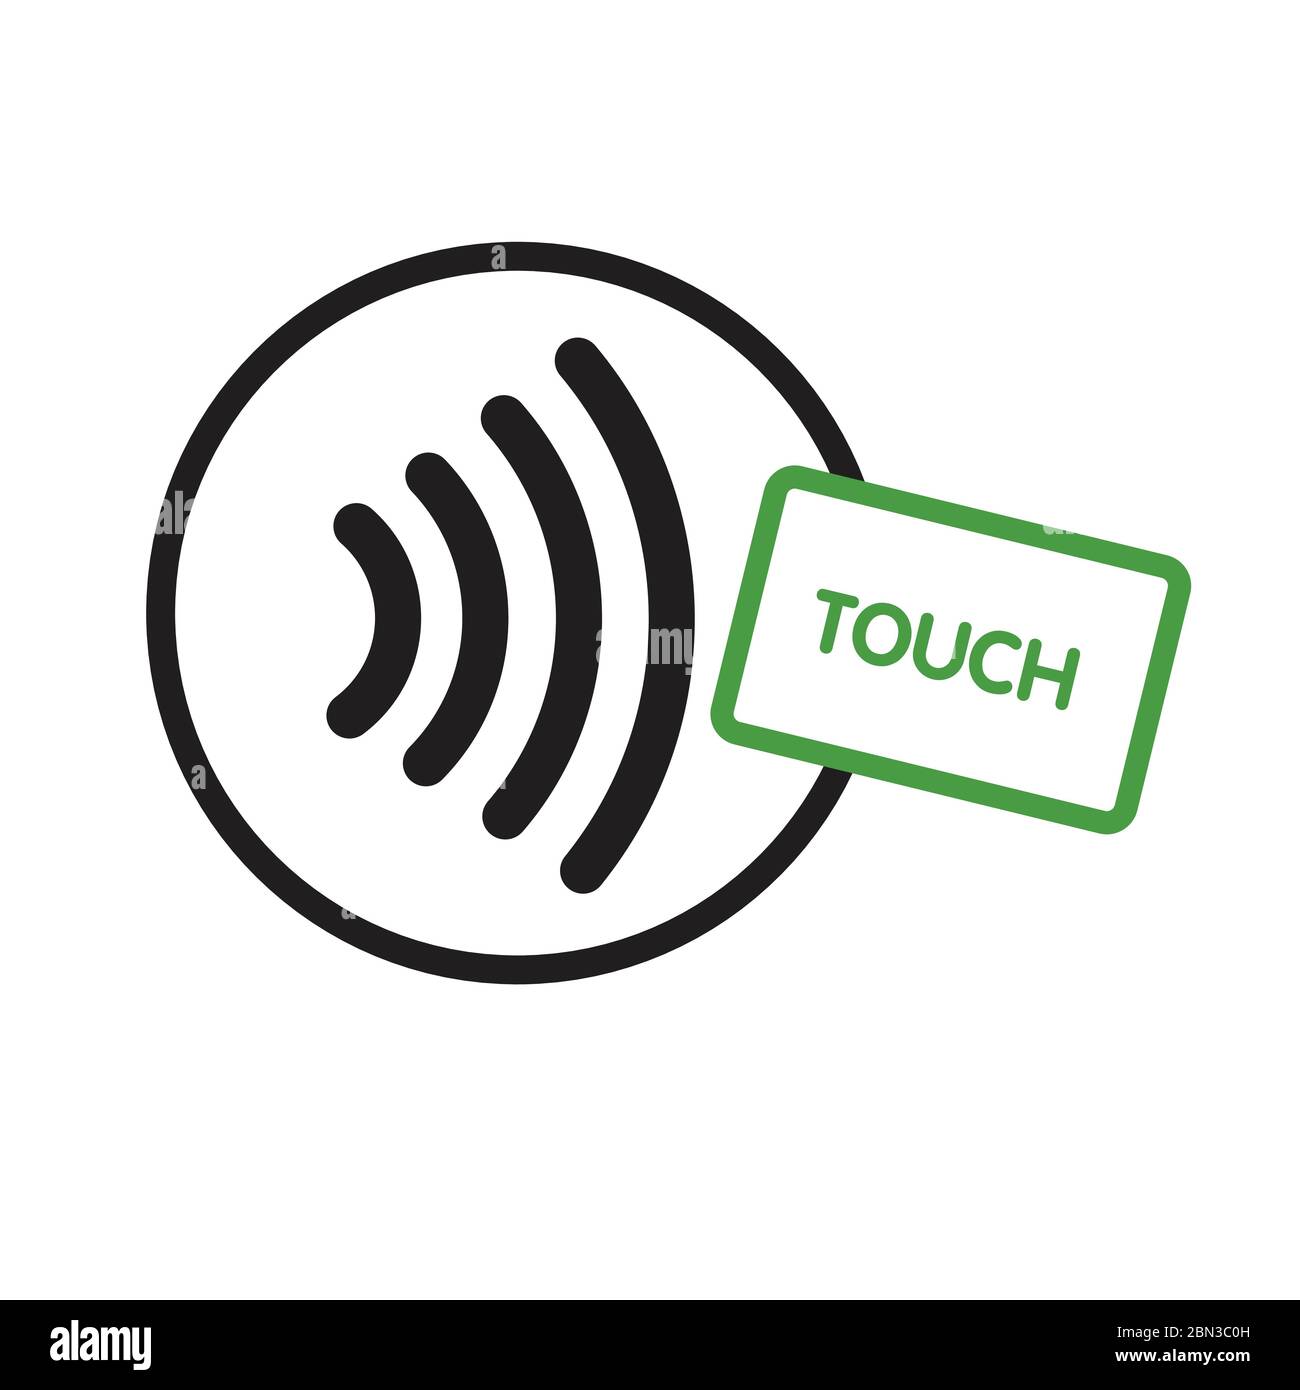 Contactless Nfc Wireless Pay Sign Logo. Credit Card Nfc Payment Vector Concept Stock Vector